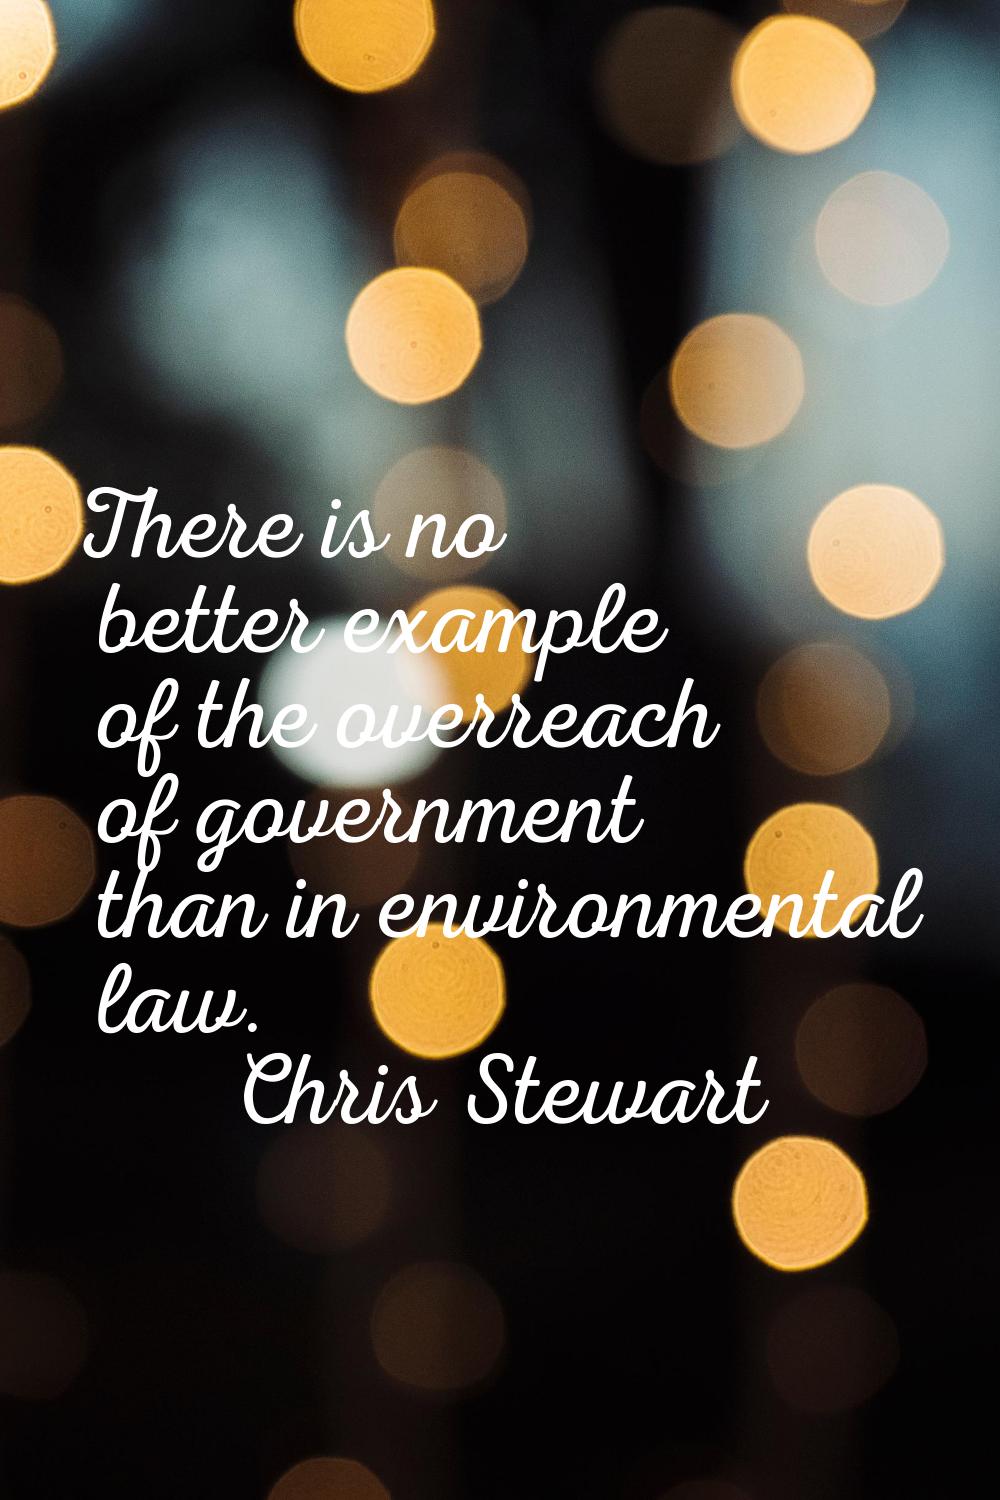 There is no better example of the overreach of government than in environmental law.